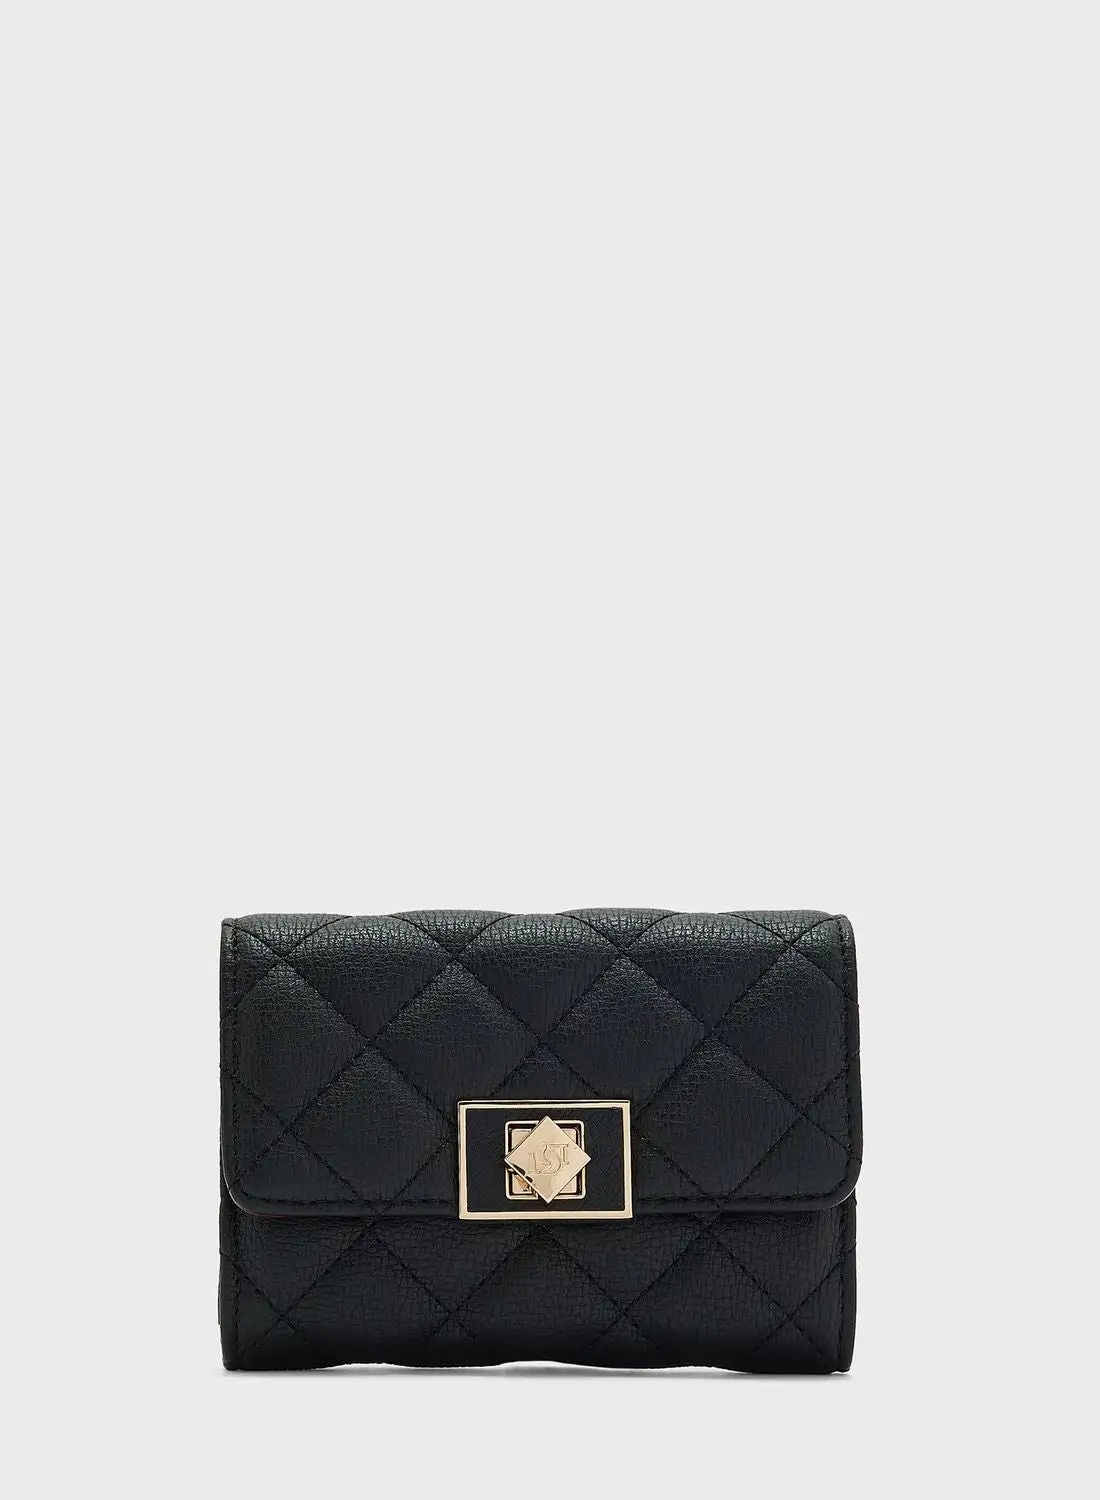 Dune LONDON Karlys Medium Quilted Turnlock Purse